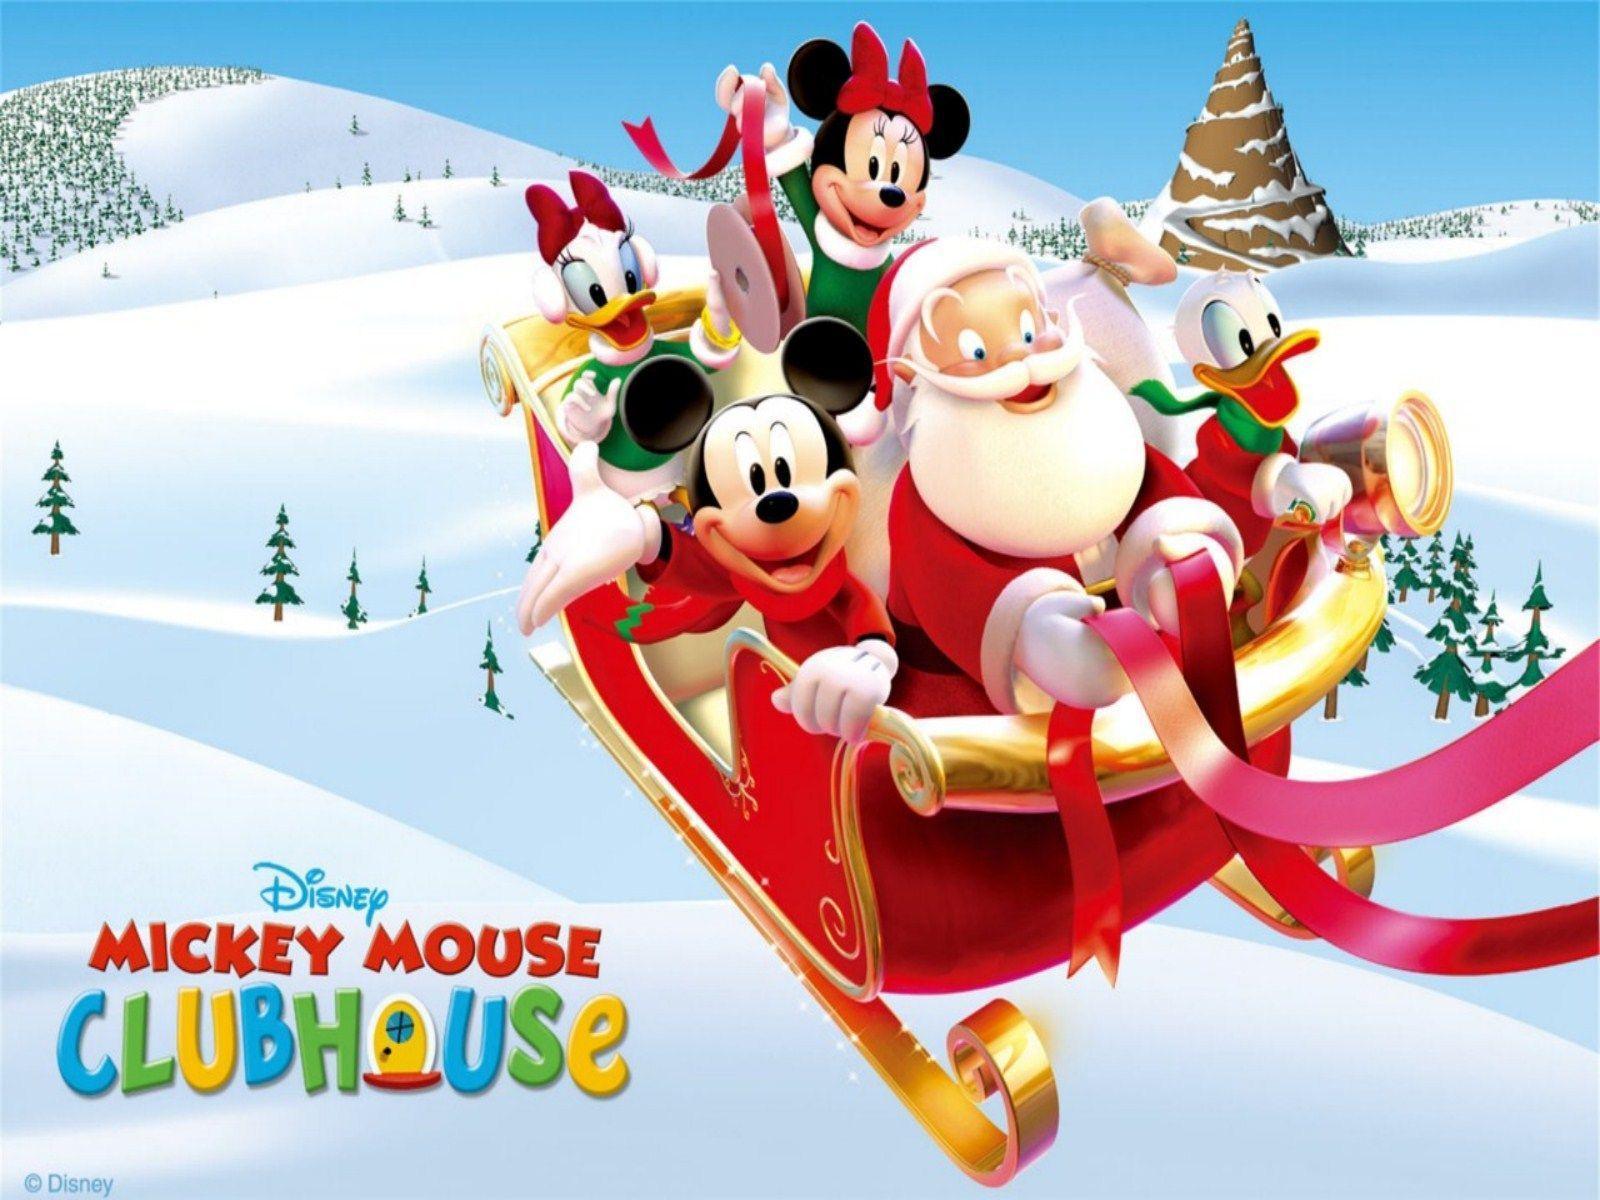 Xmas Stuff For > Baby Mickey Mouse Christmas Wallpaper